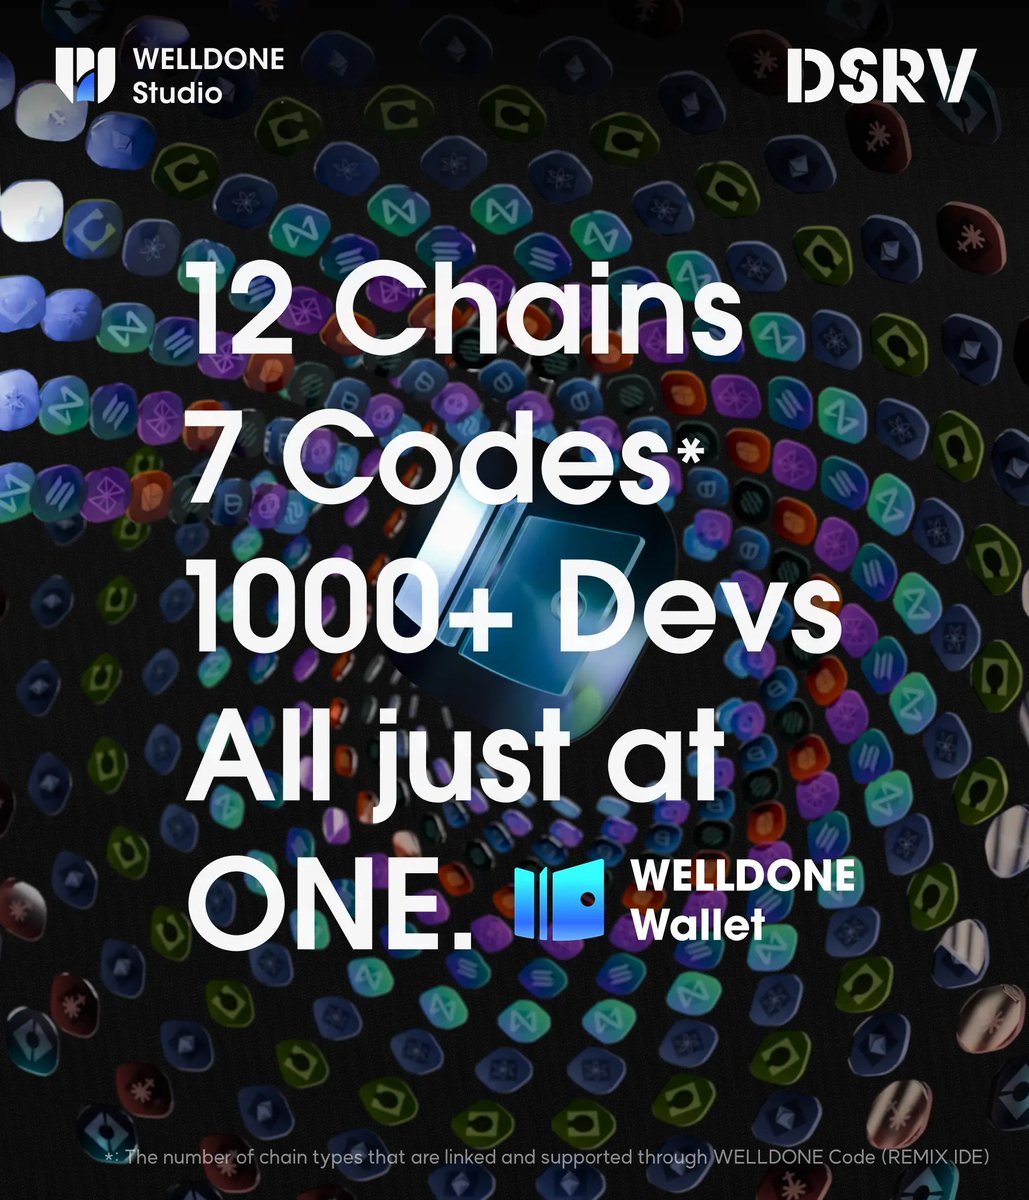 WELLDONE Wallet, your trusted companion in developing the multi-chain universe, hits 1000 dev user!